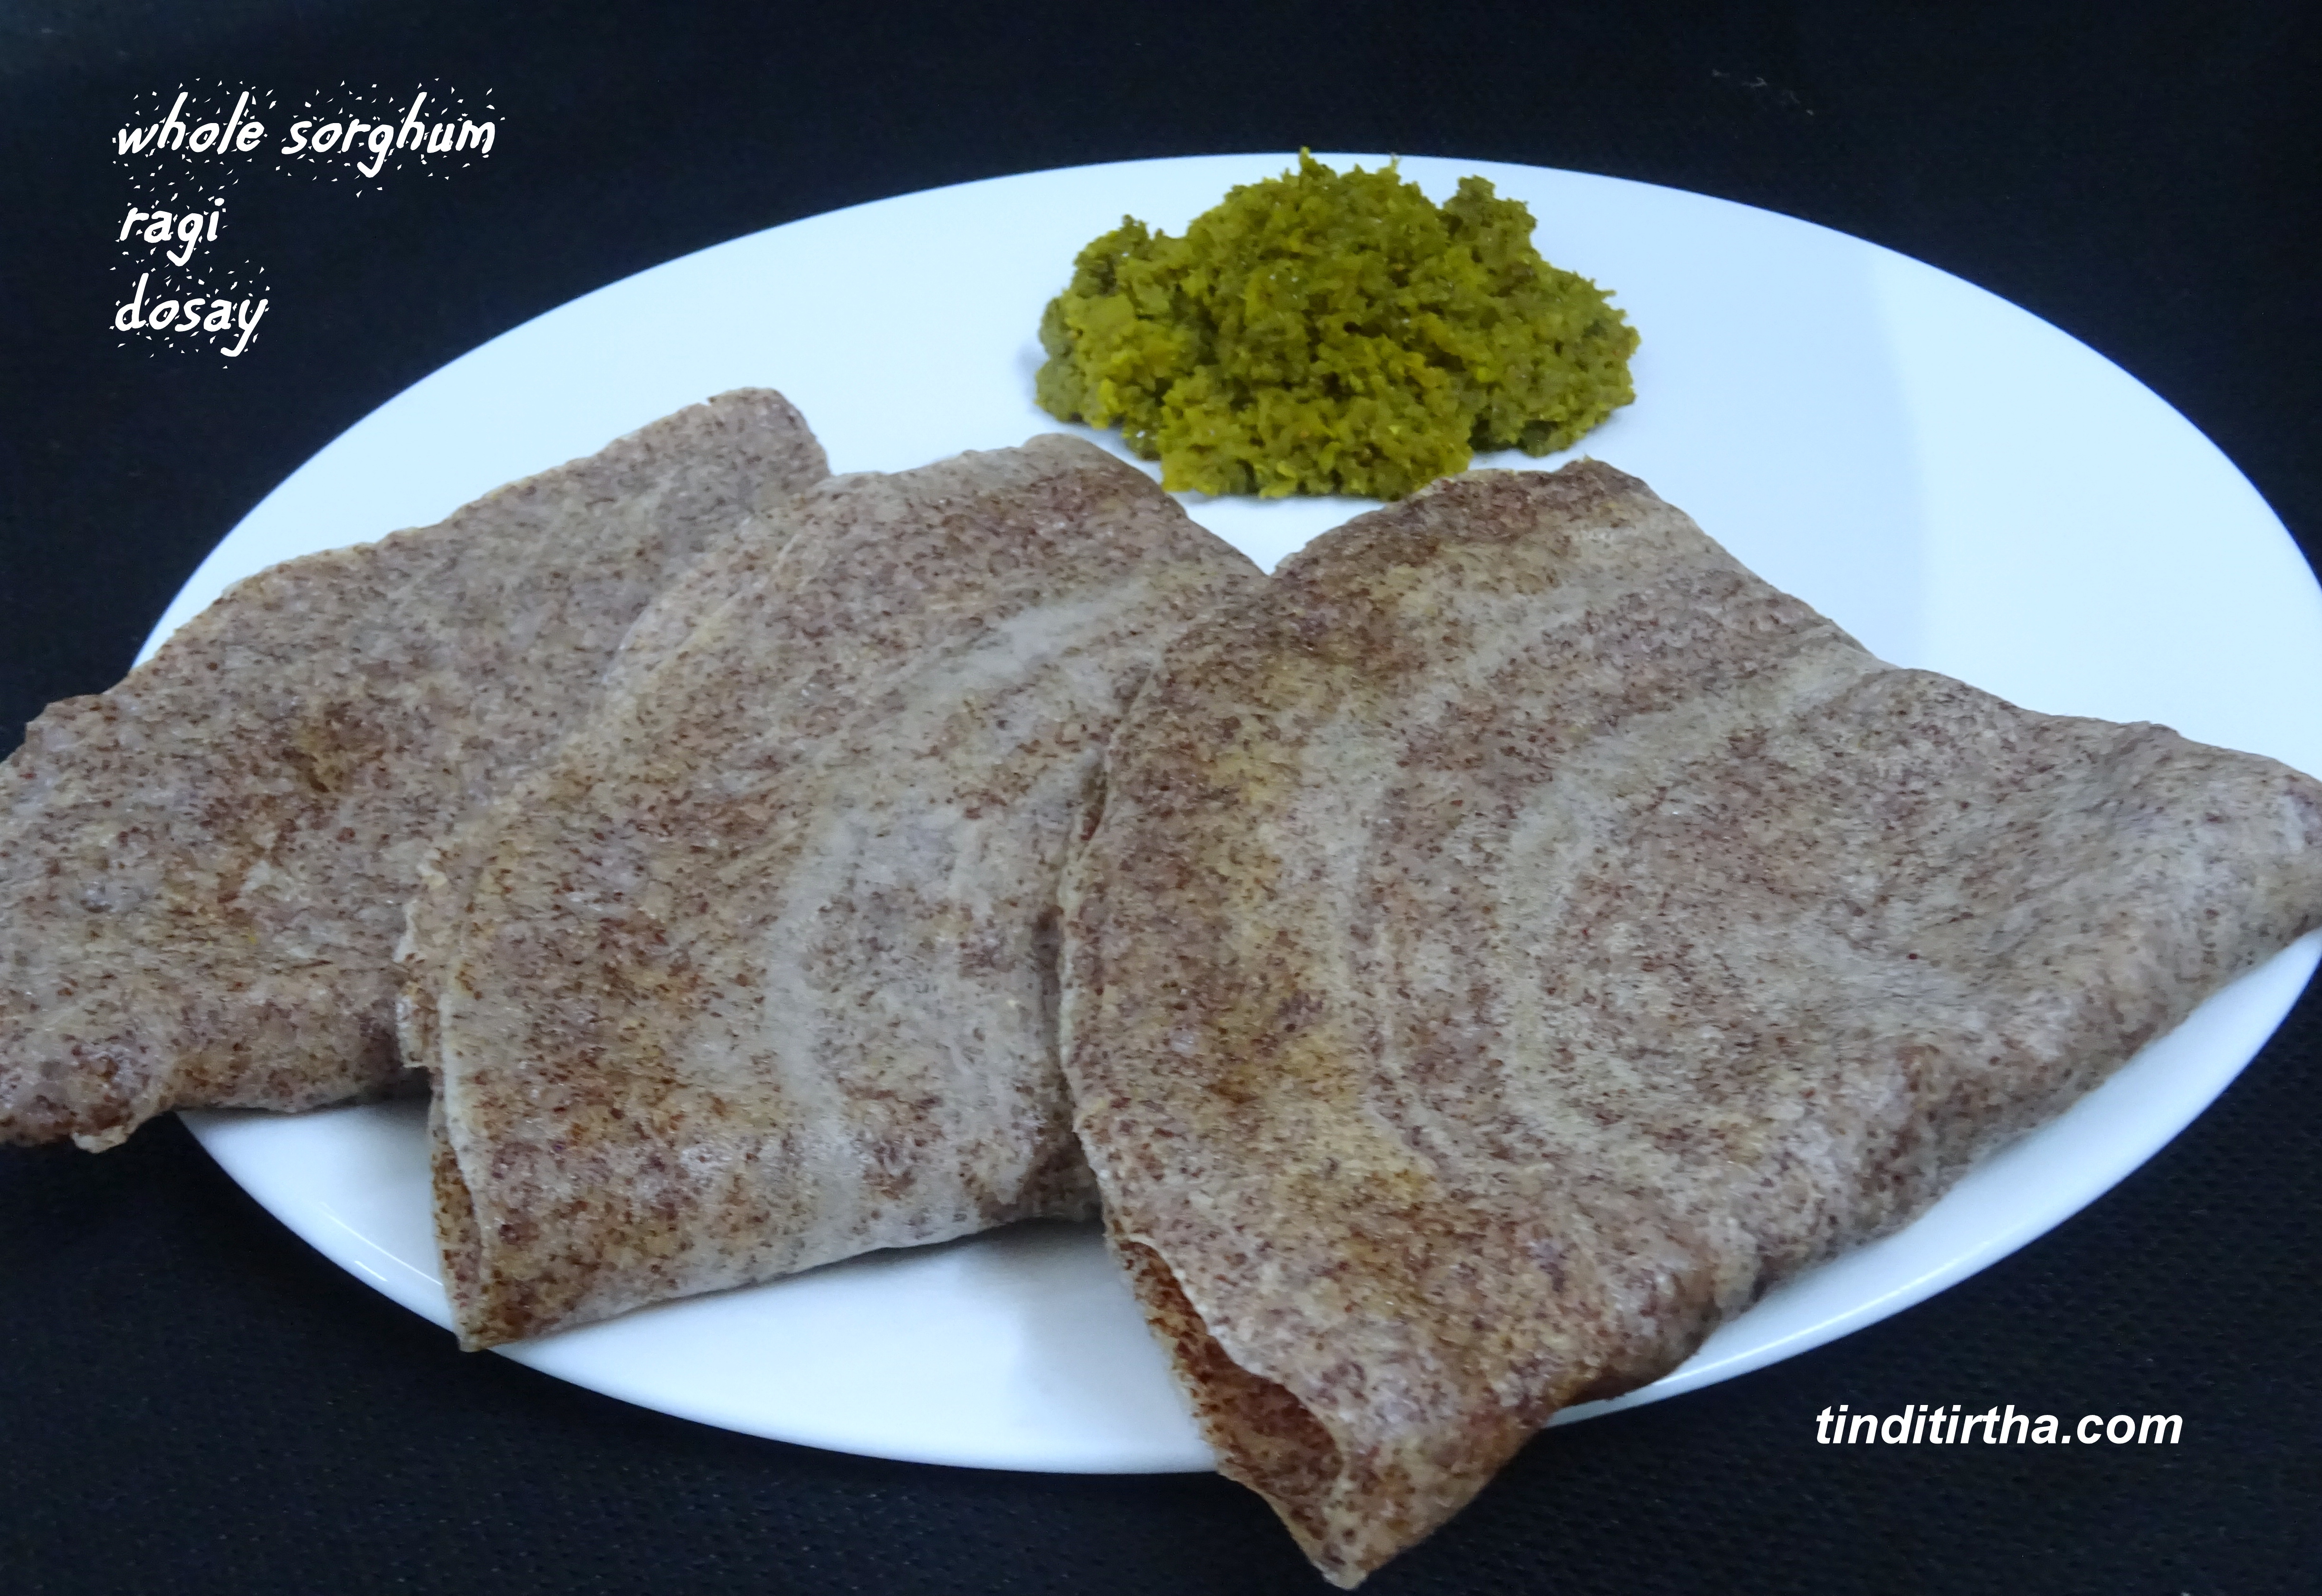 WHOLE SORGHUM-RAGI DOSAY ….. a diabetic friendly recipe which also includes oats & methi